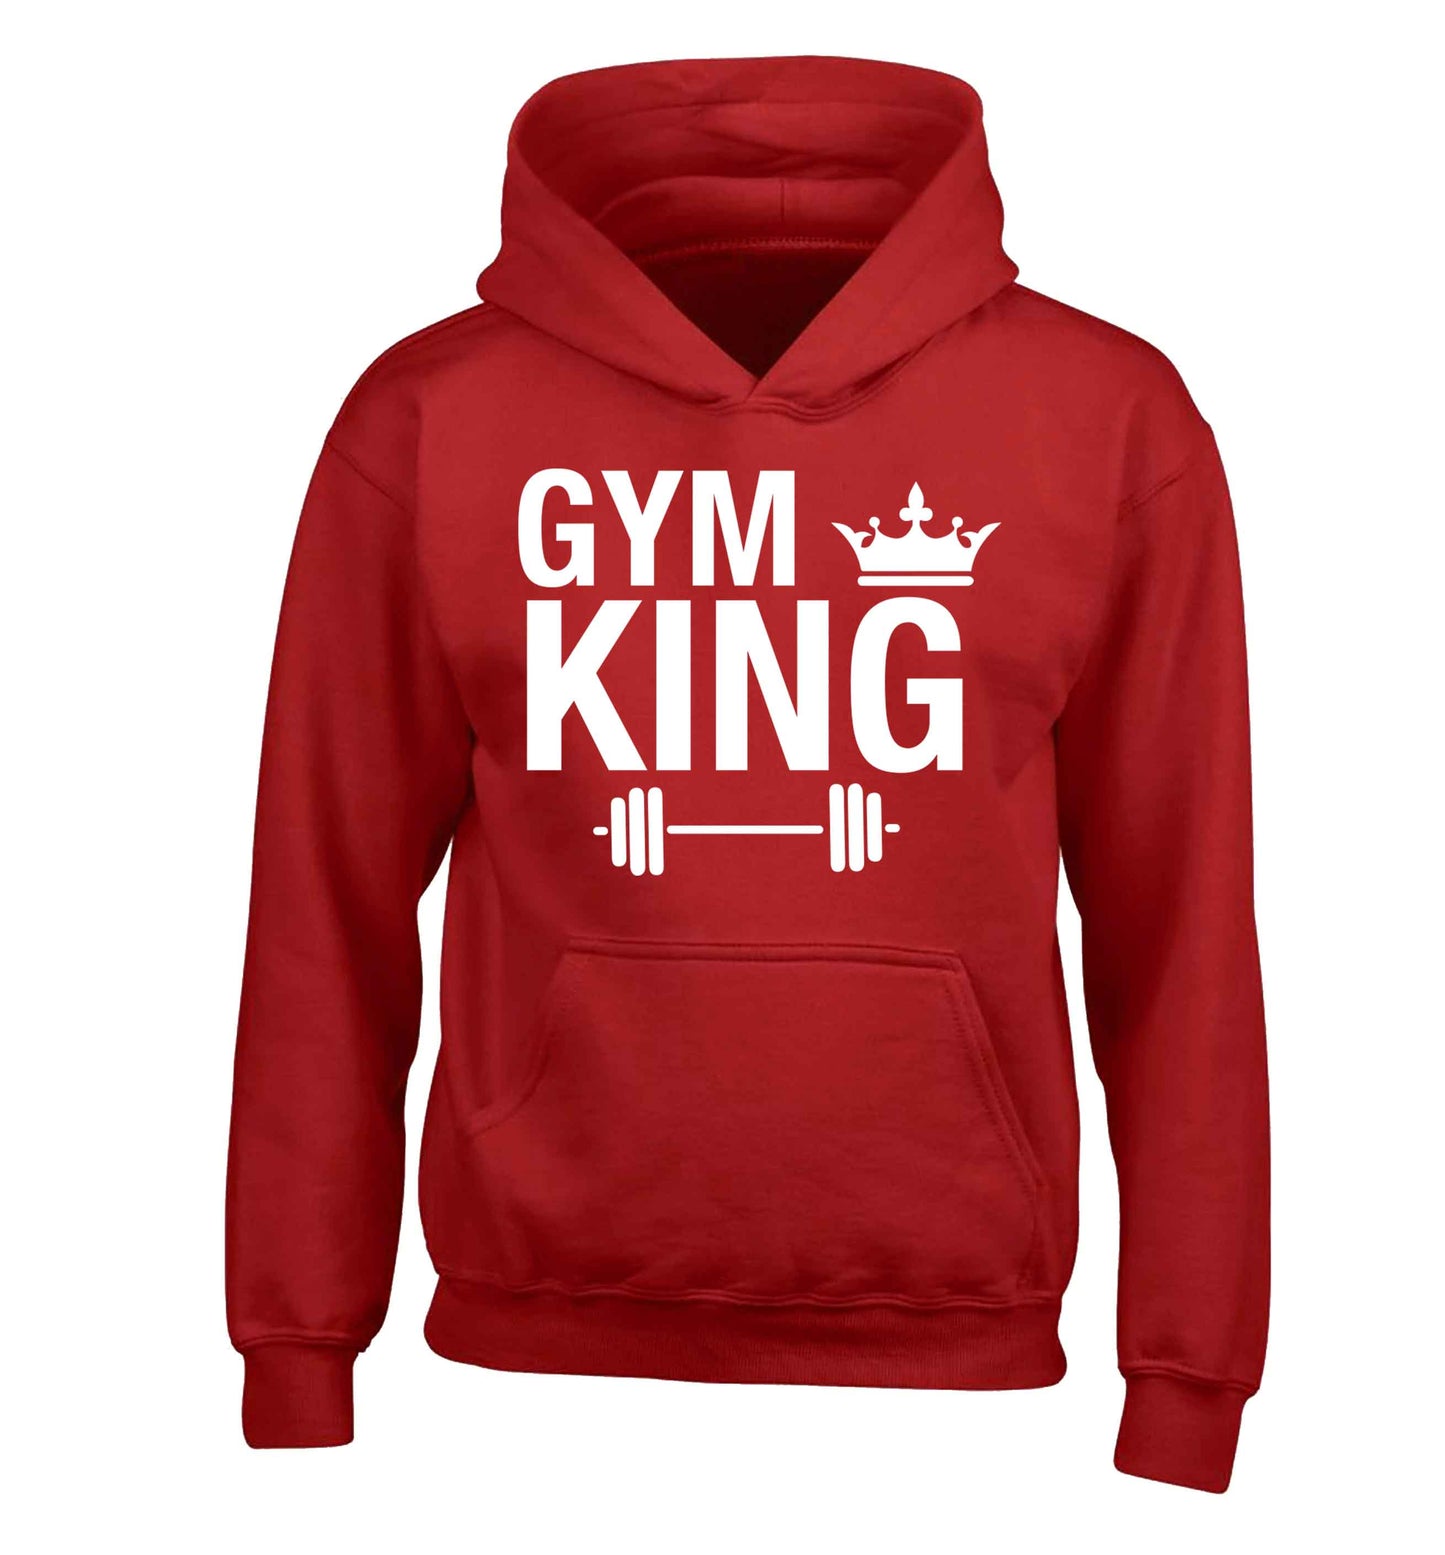 Gym king children's red hoodie 12-13 Years